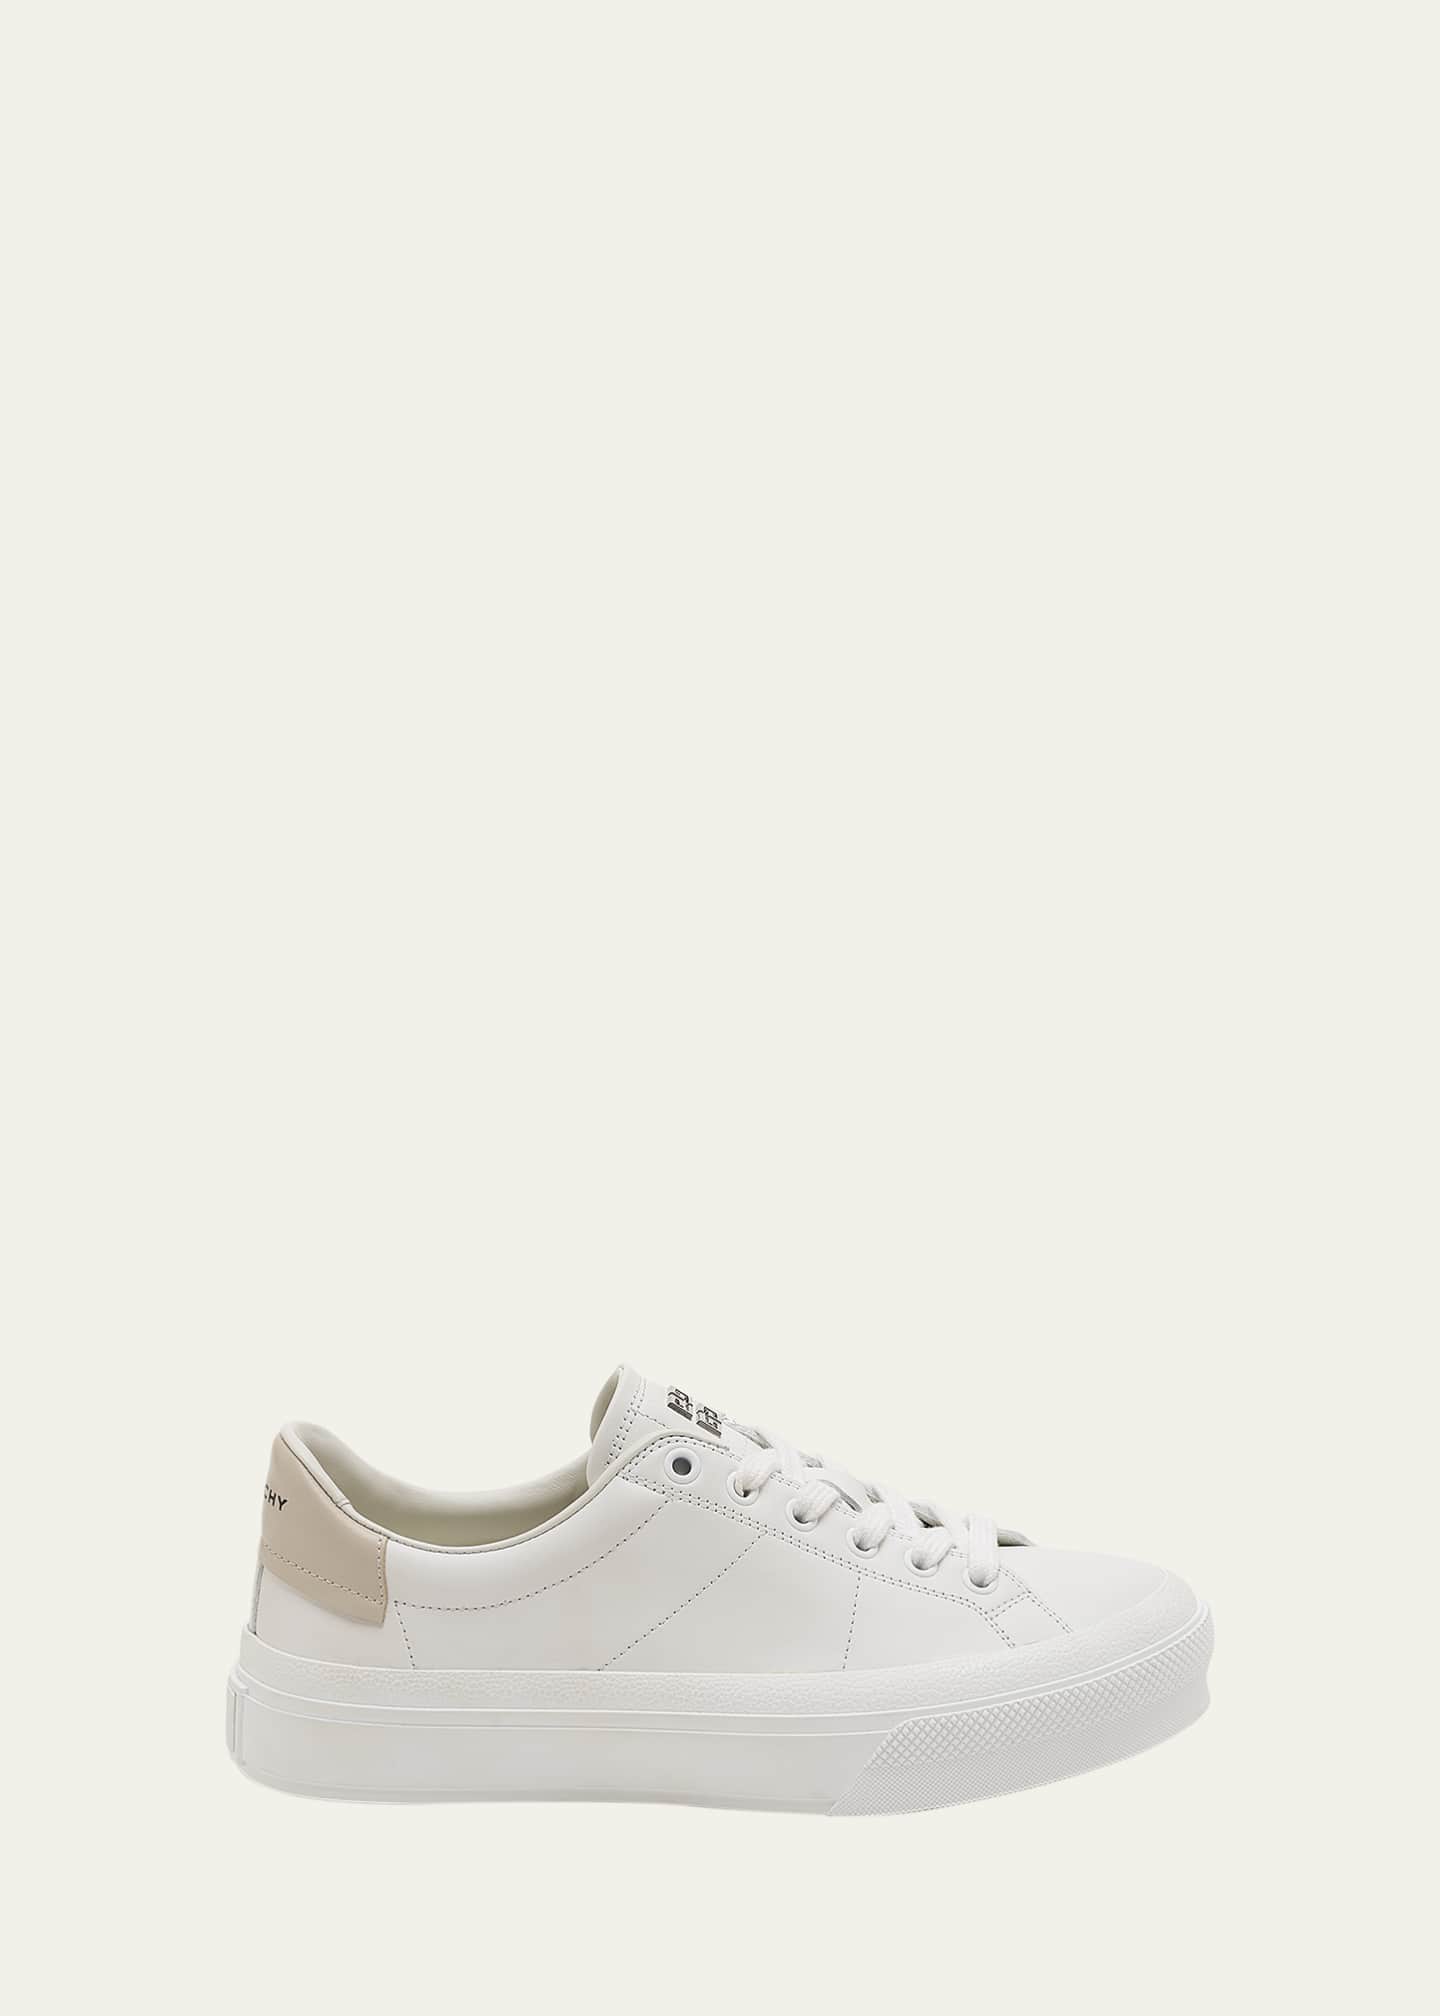 Givenchy City Sport Bicolor Low-Top Sneakers - Bergdorf Goodman